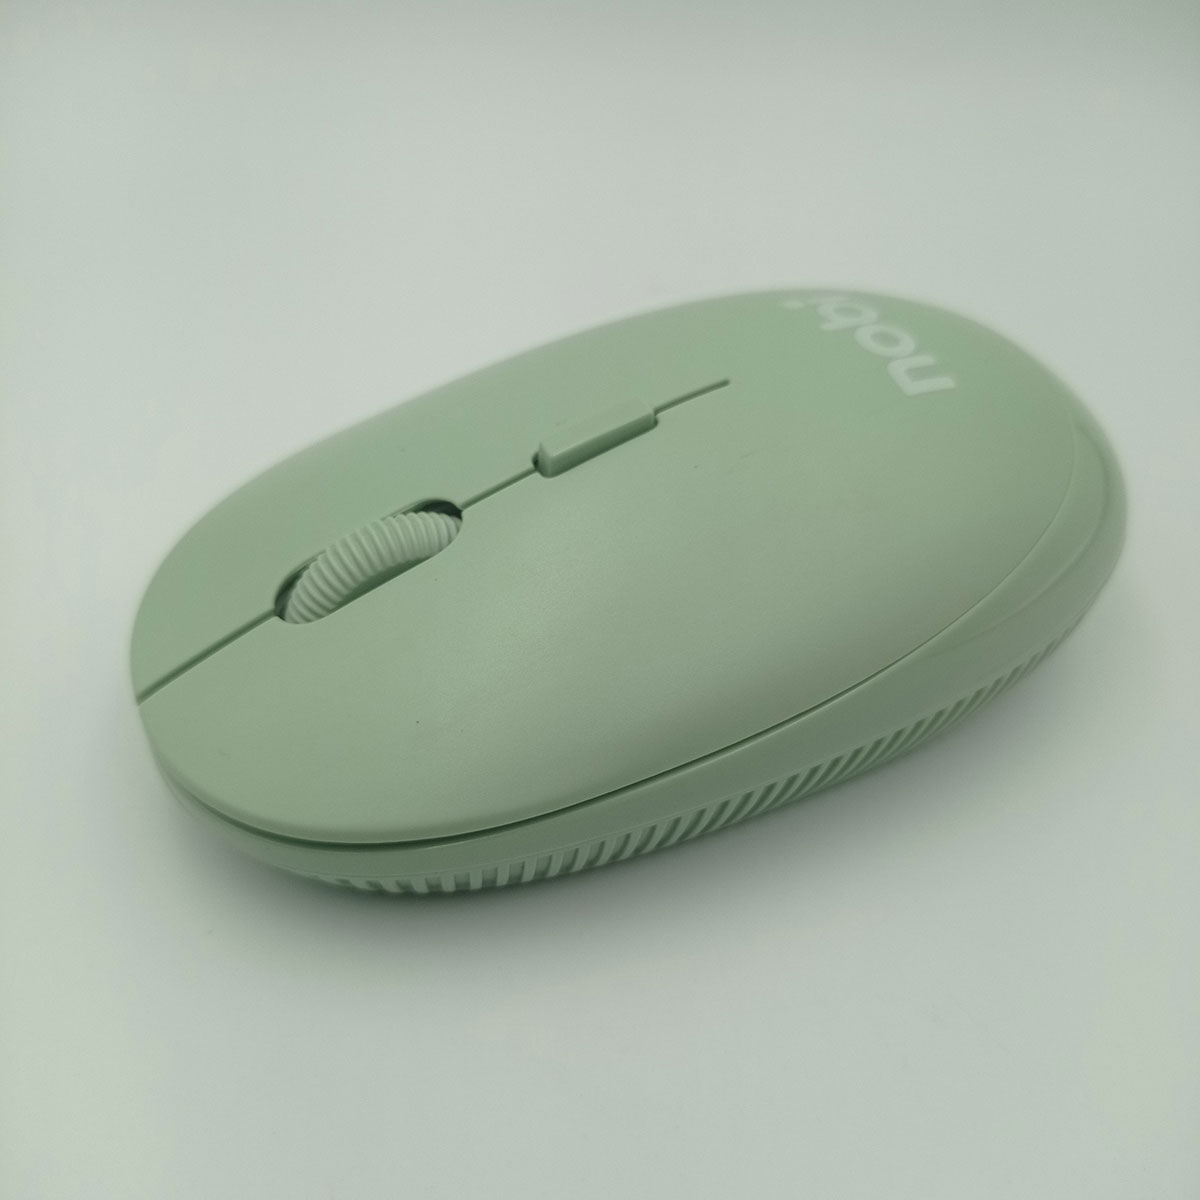 nm71-wireless-mouse-green-01